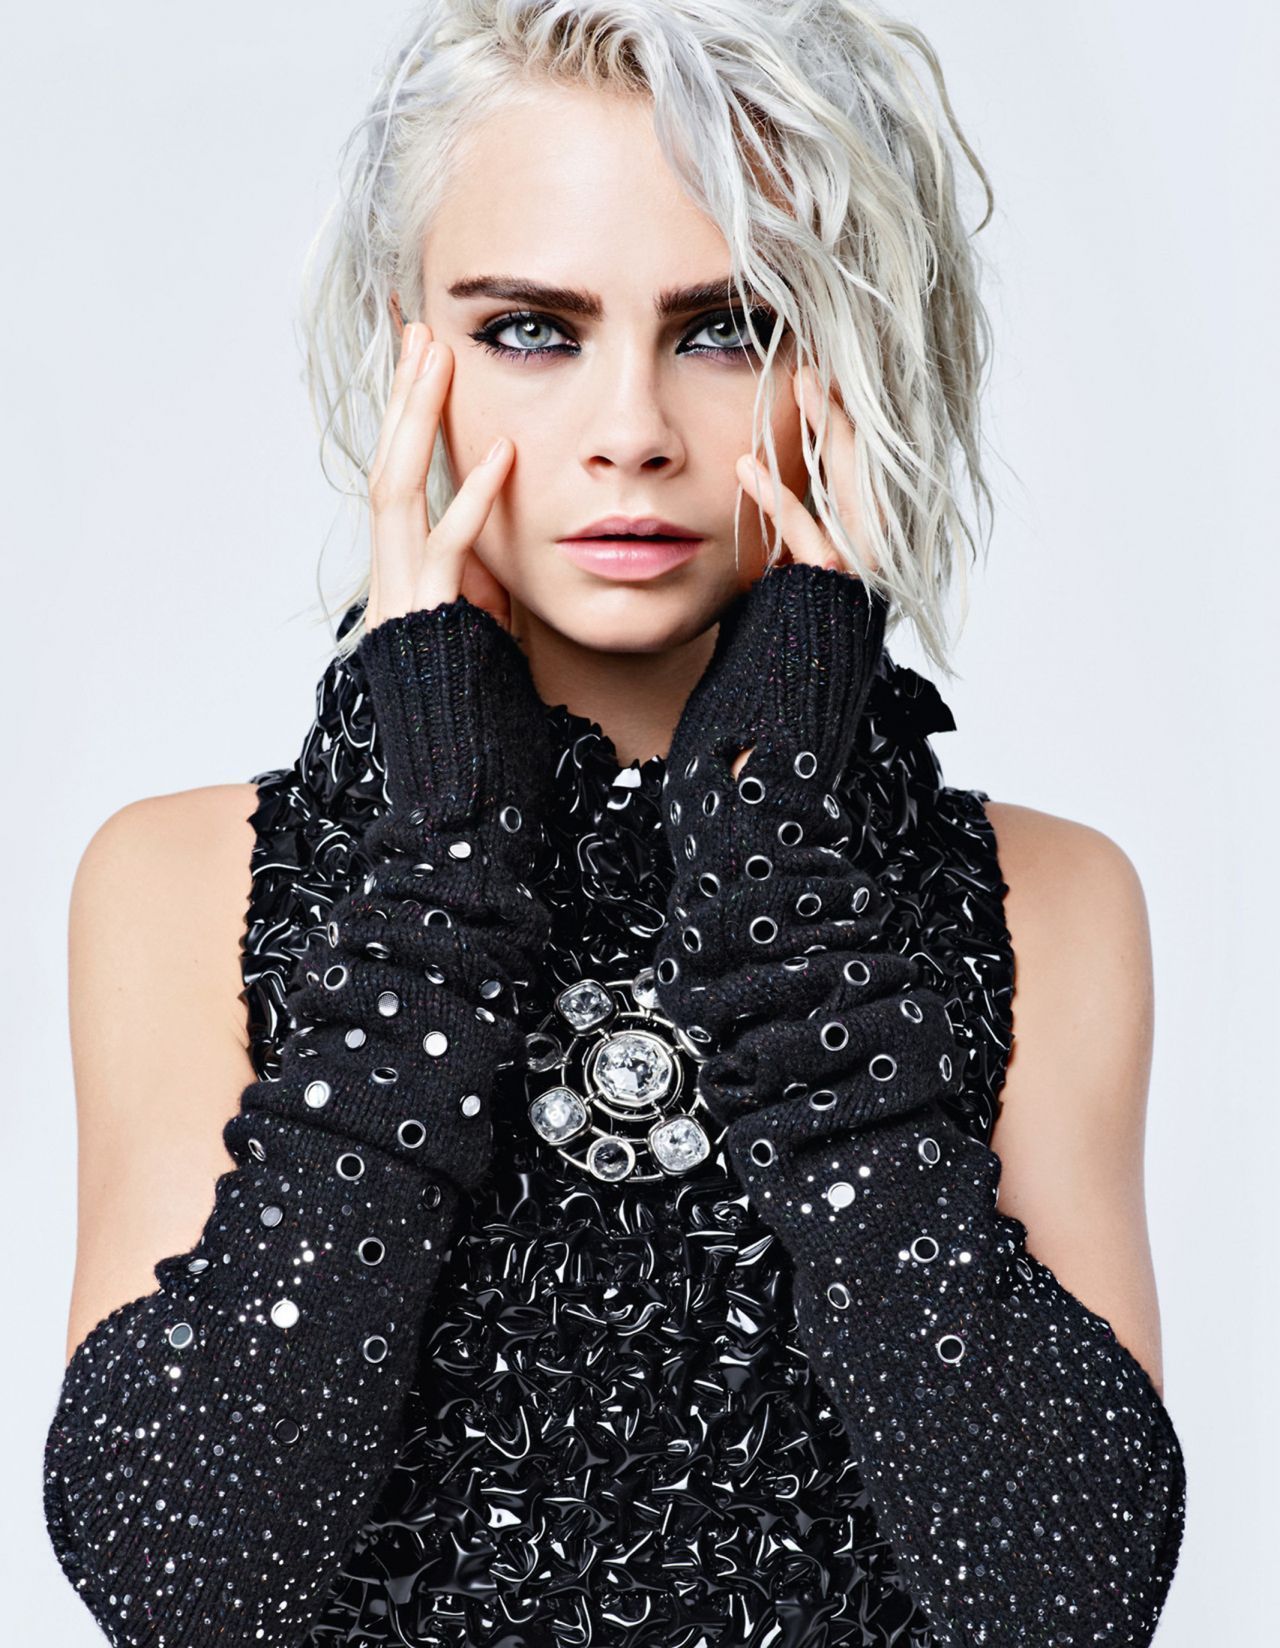 Cara Delevingne Chanel Fall Winter Collection